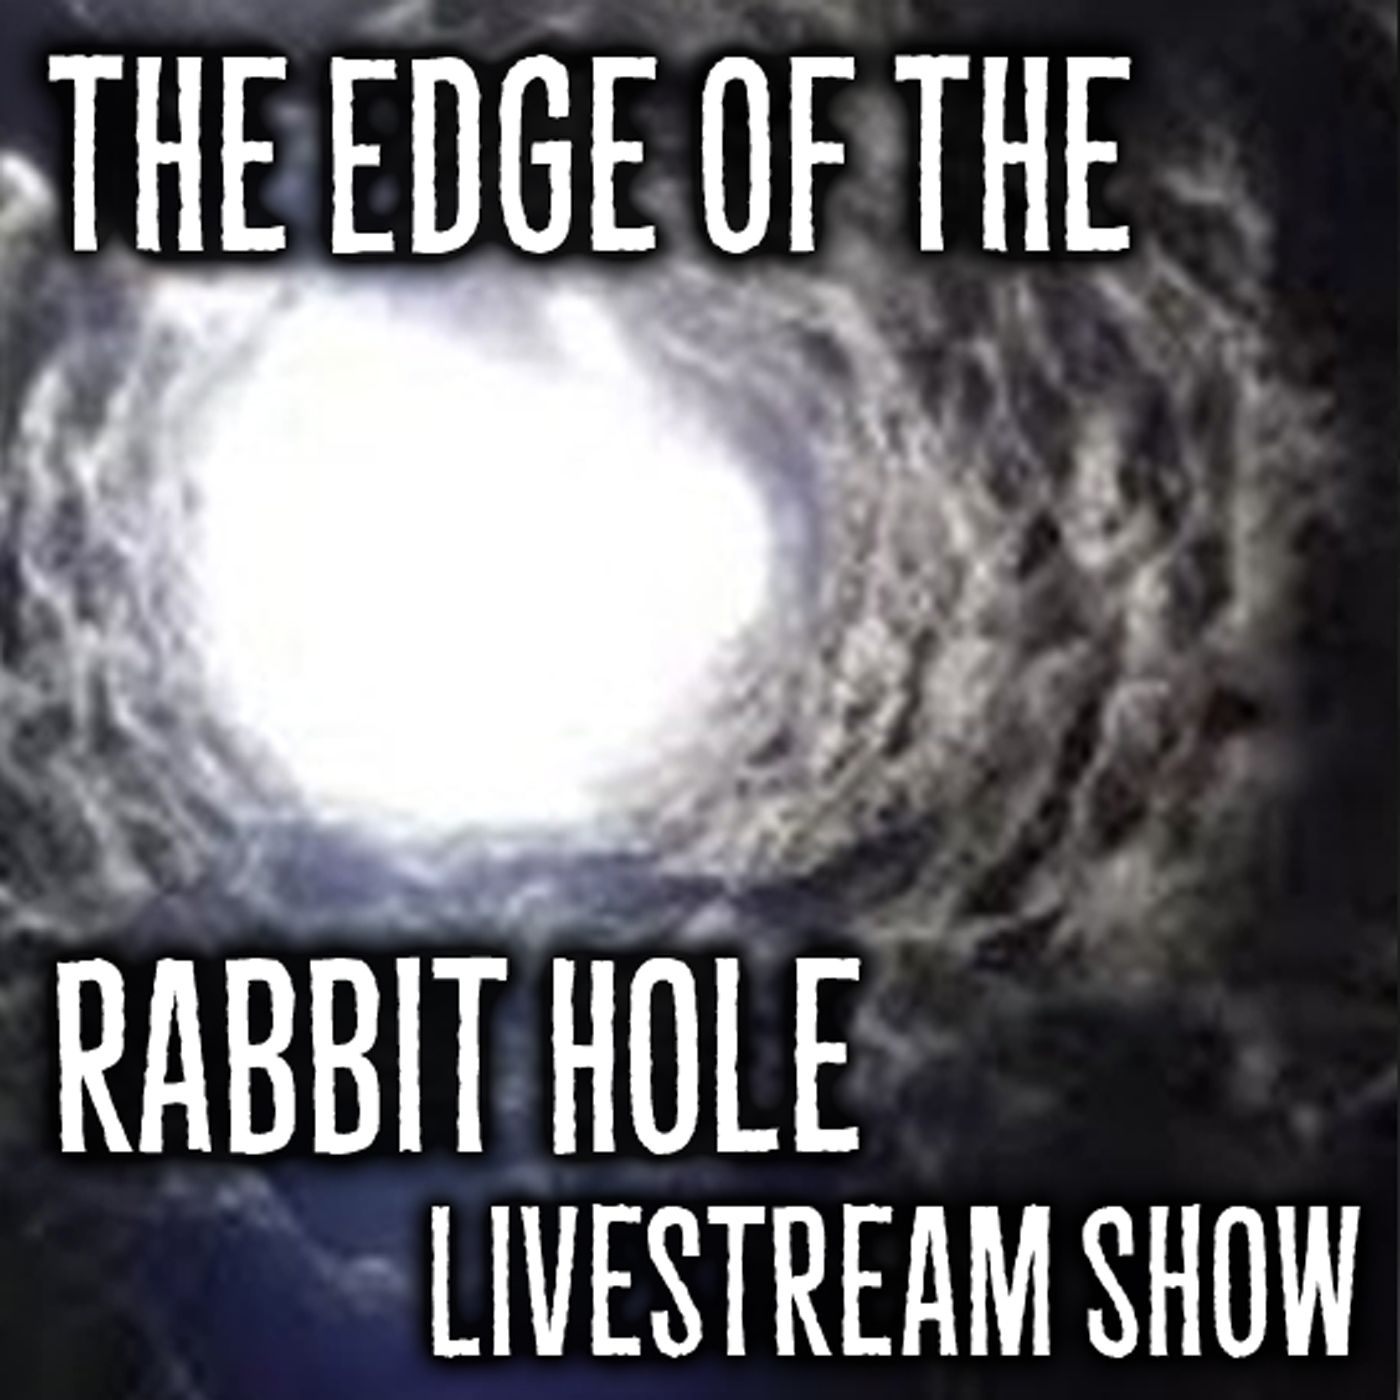 The Edge Of The Rabbit Hole